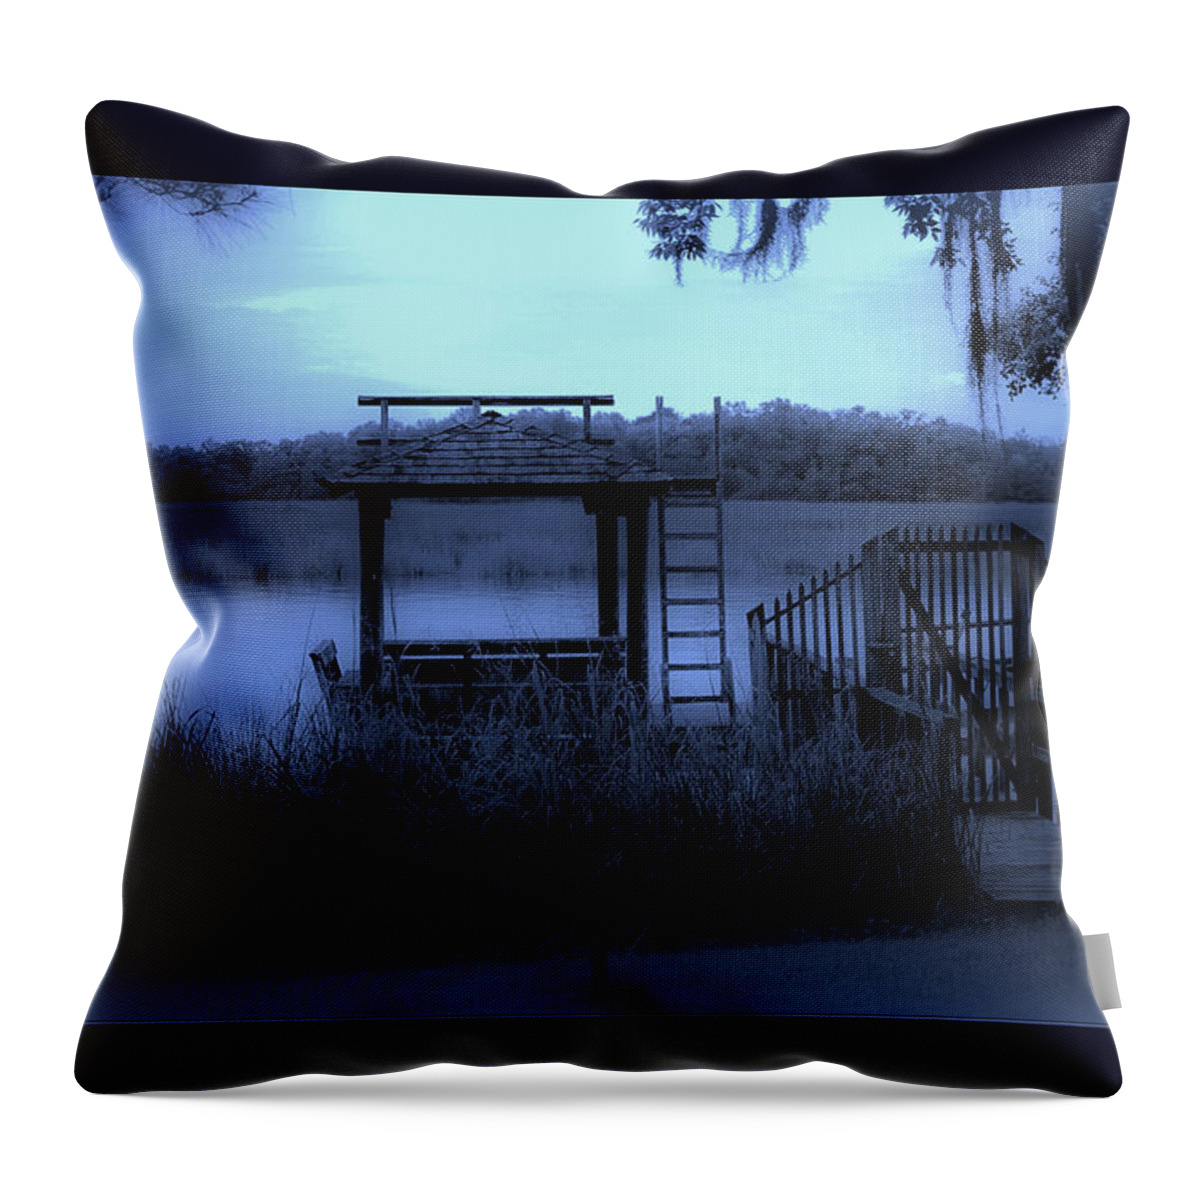 Dock Throw Pillow featuring the photograph A Quiet Place By The Marsh by DigiArt Diaries by Vicky B Fuller